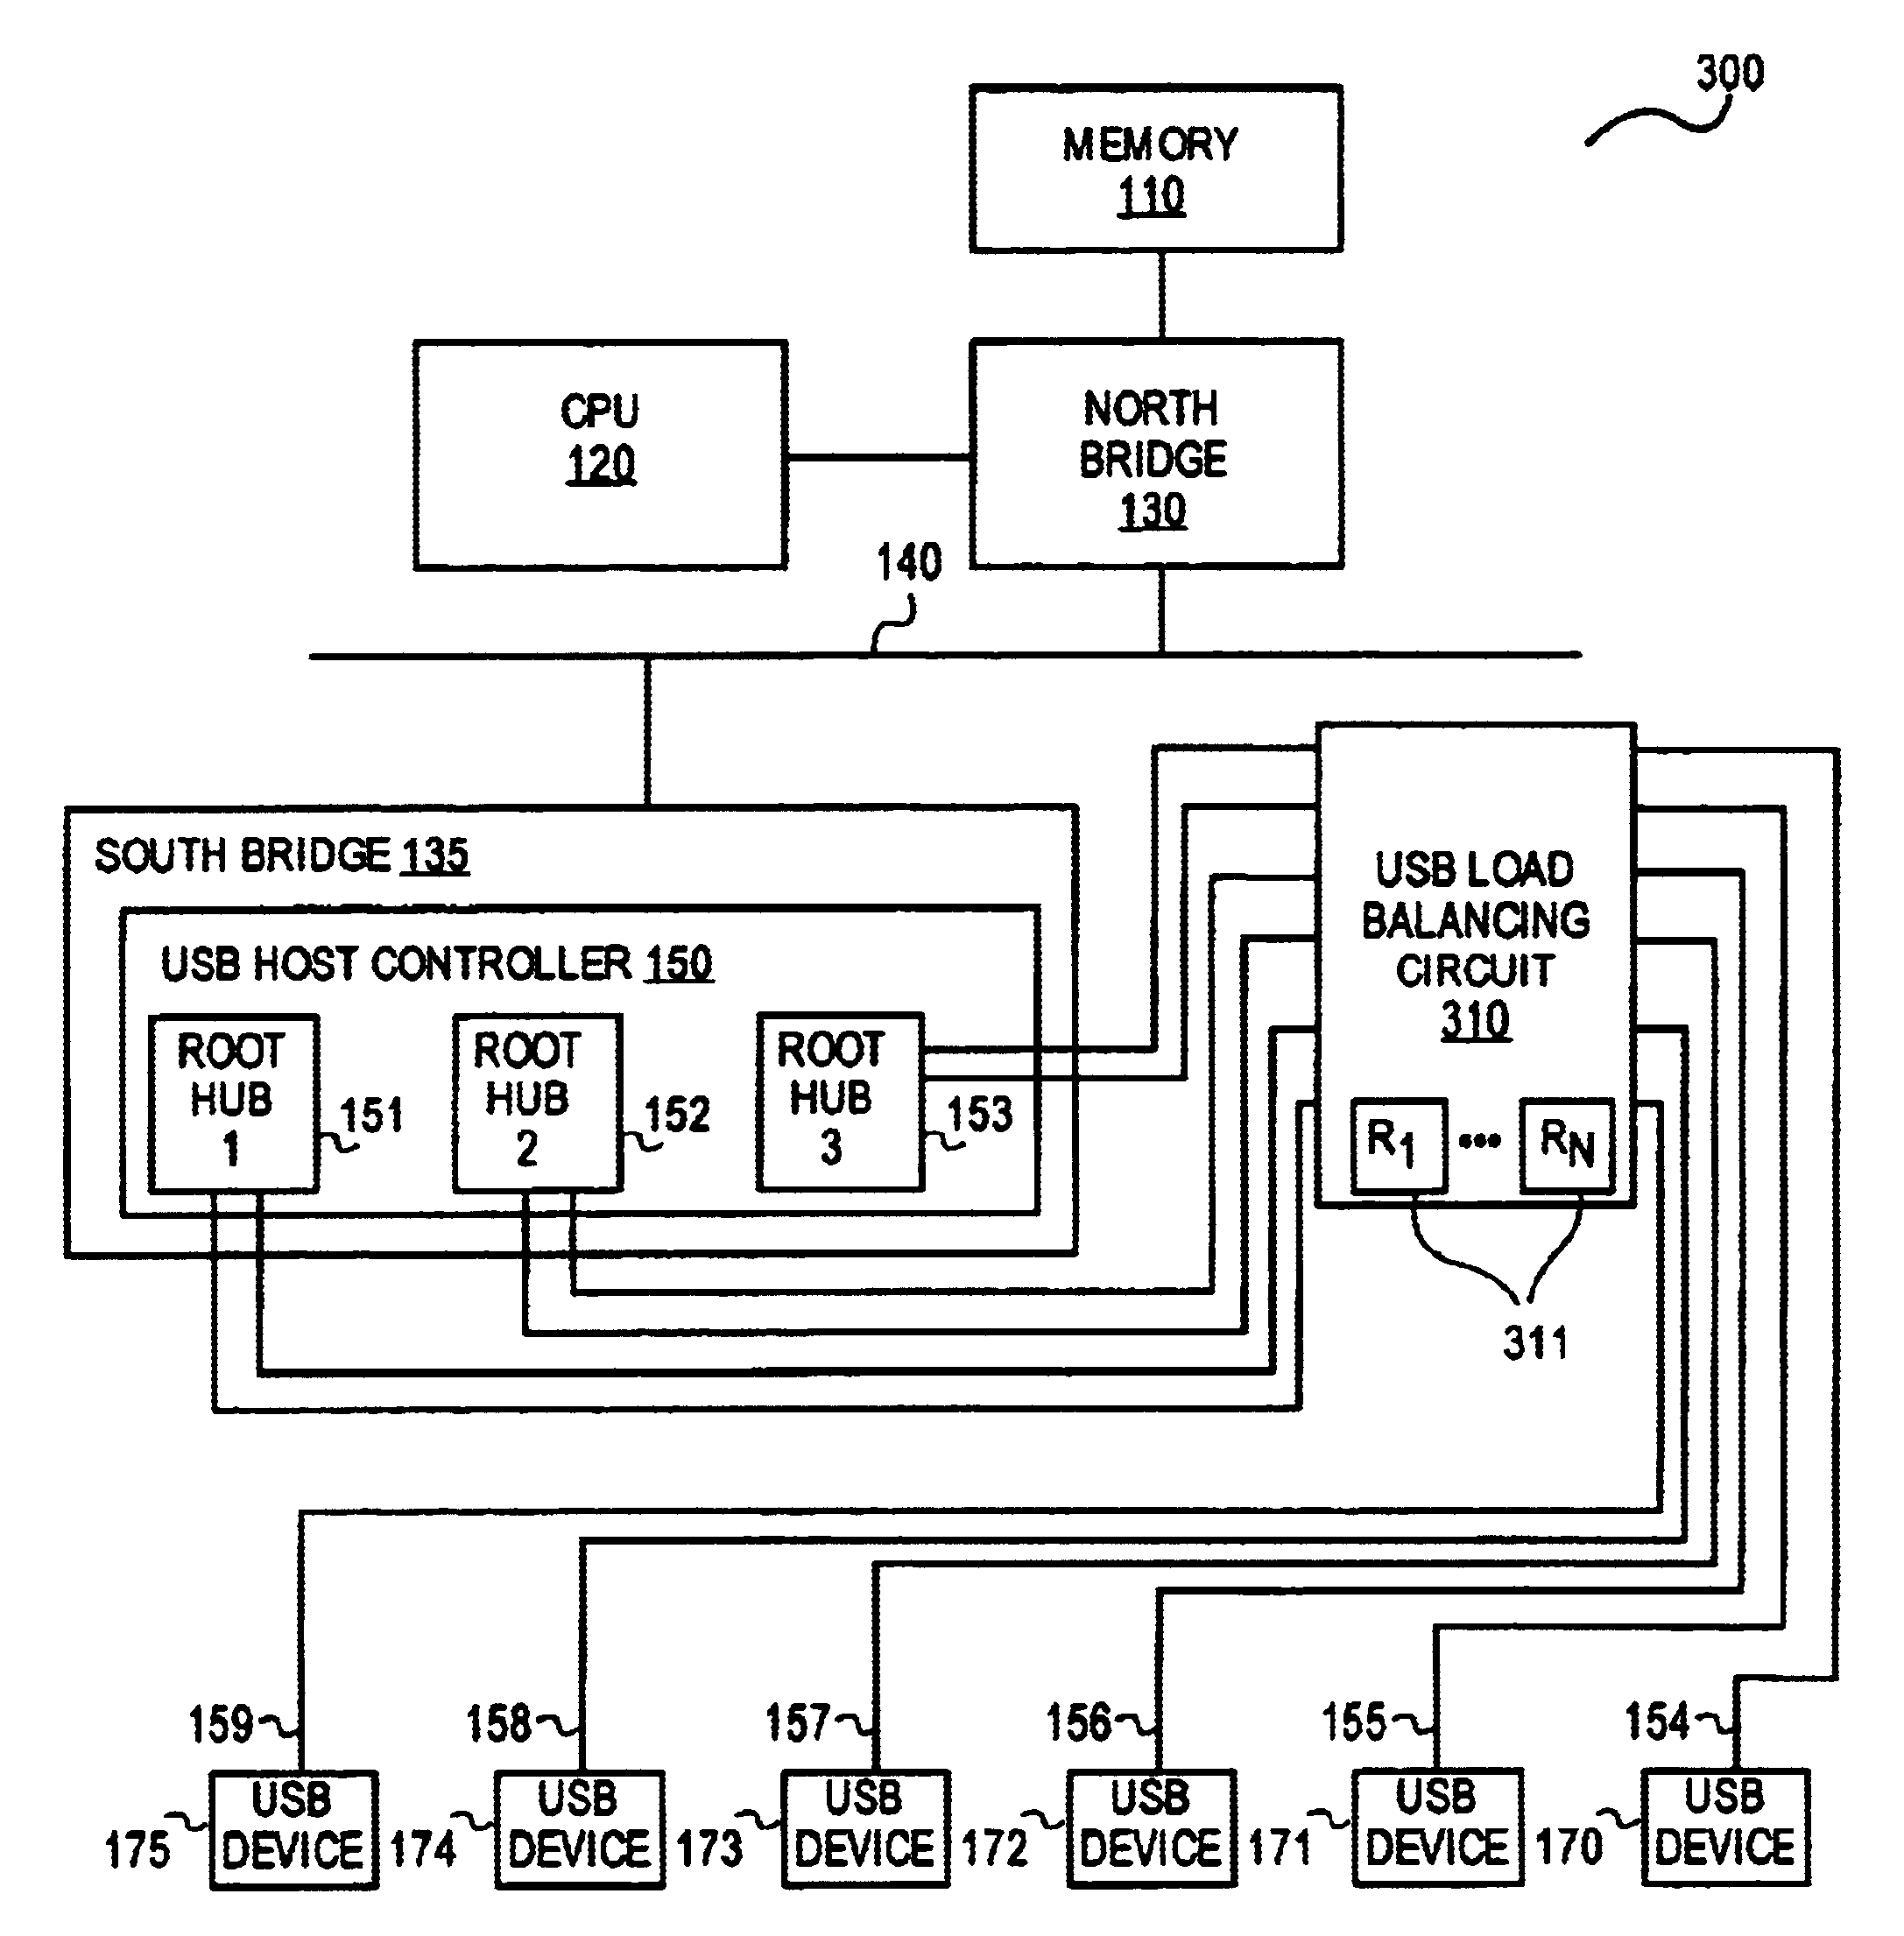 Method and apparatus to maximize bandwidth availability to USB devices